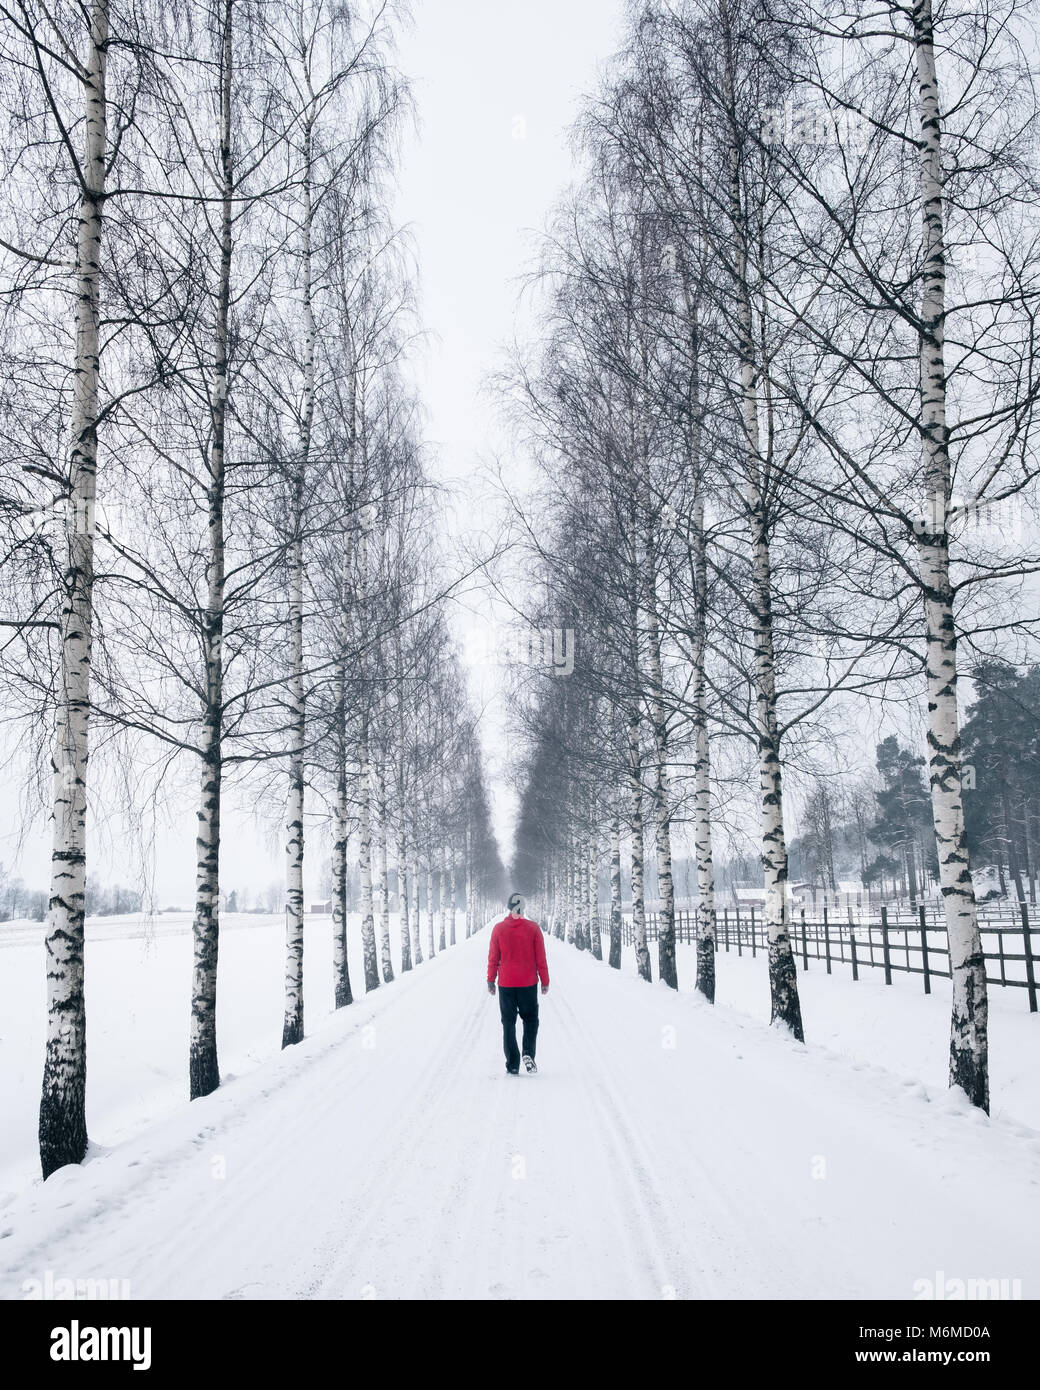 Man walking snowy road with birch trees at winter day in Finland Stock Photo